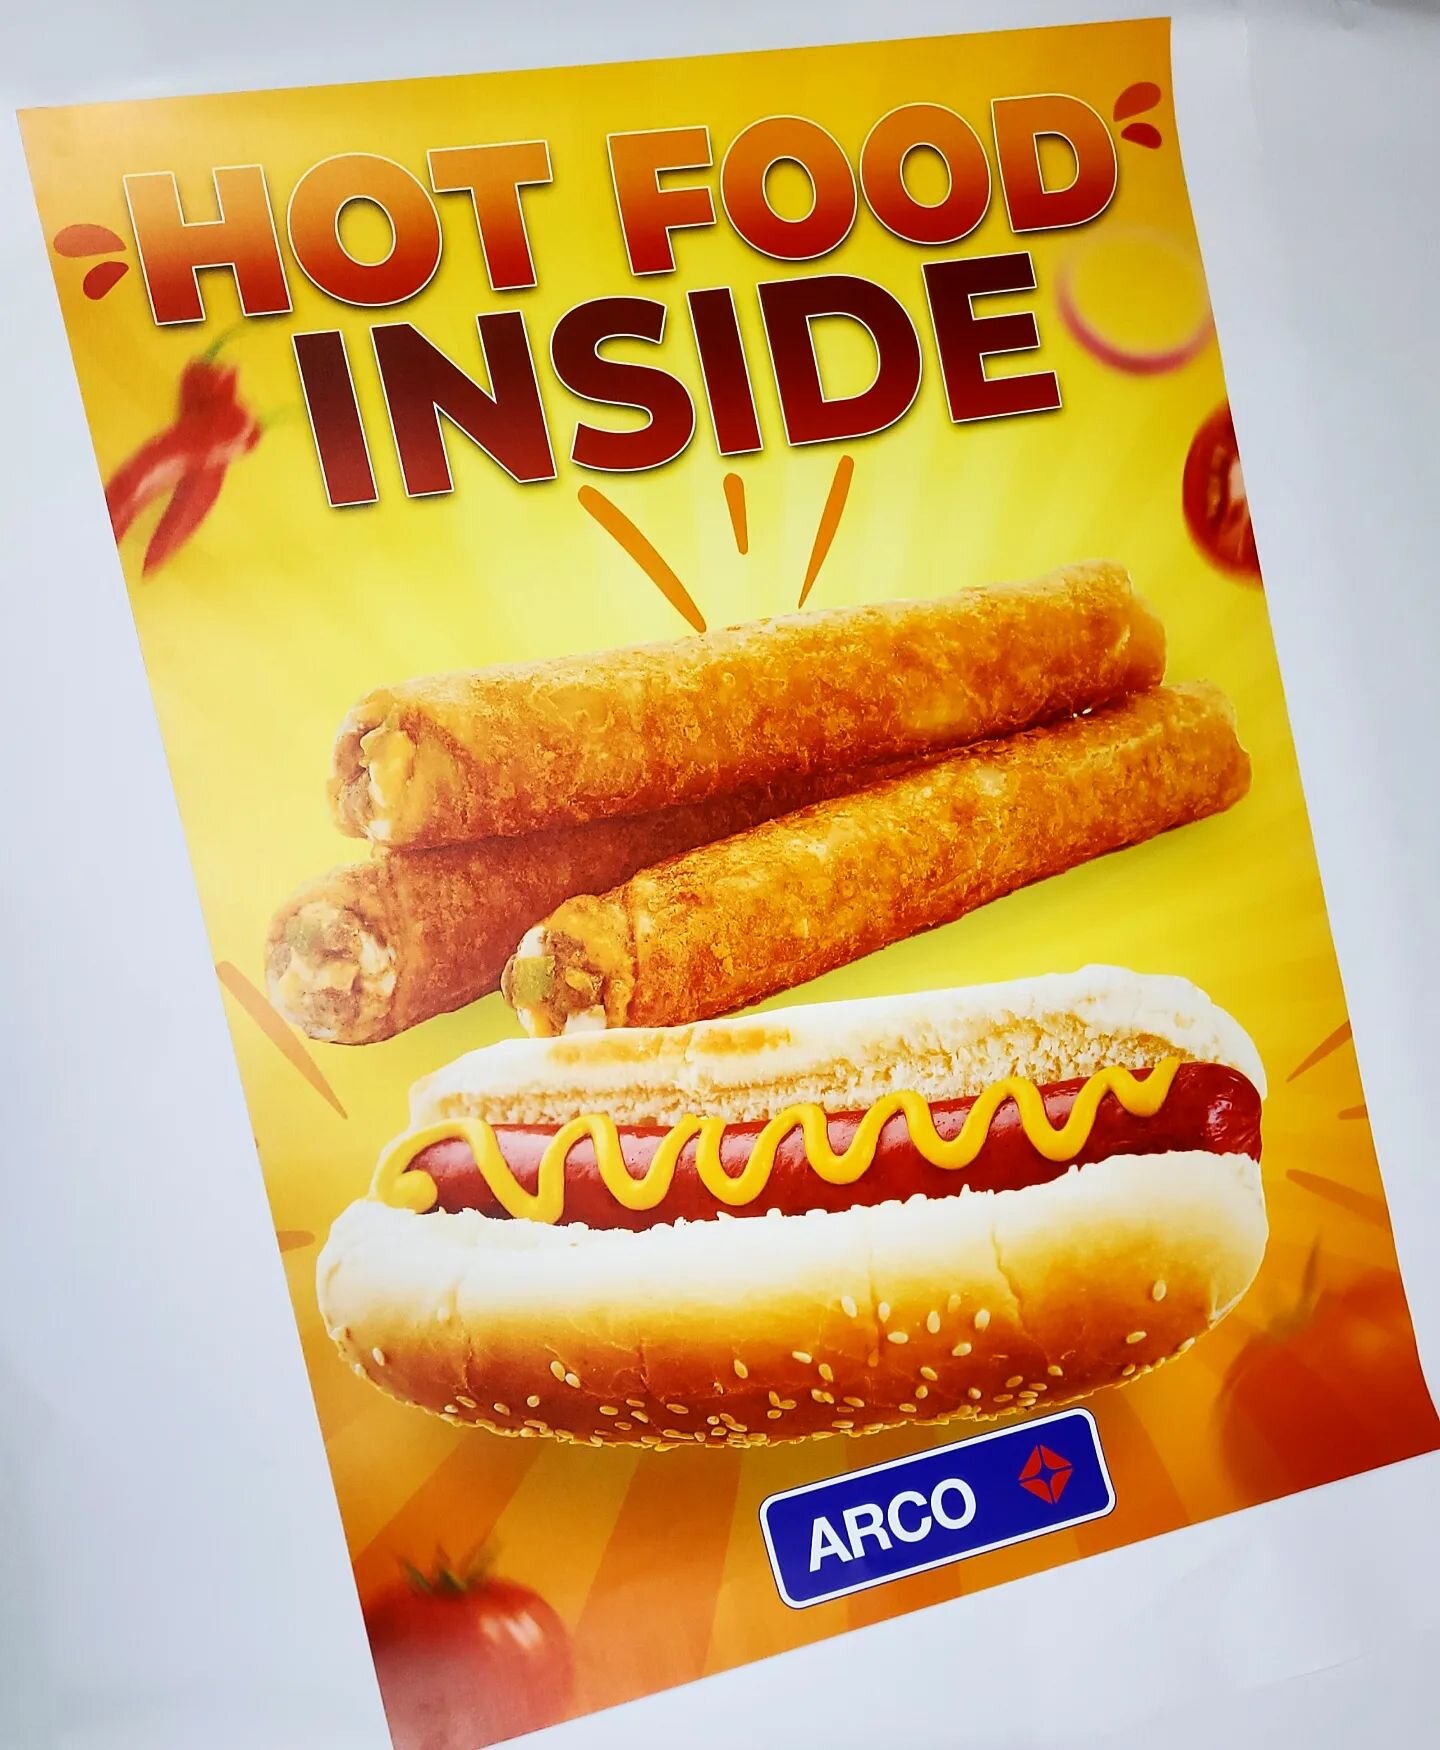 &quot;Hot Food Inside&quot; Poster designed and printed for Arco Gas Stations across Southern California!

#posters #posterprinting #posterdesign #design #graphicdesign #design4u #d4u #arco #arcogasstation #gasstation #hotdogs #taquitos #hotfood #foo